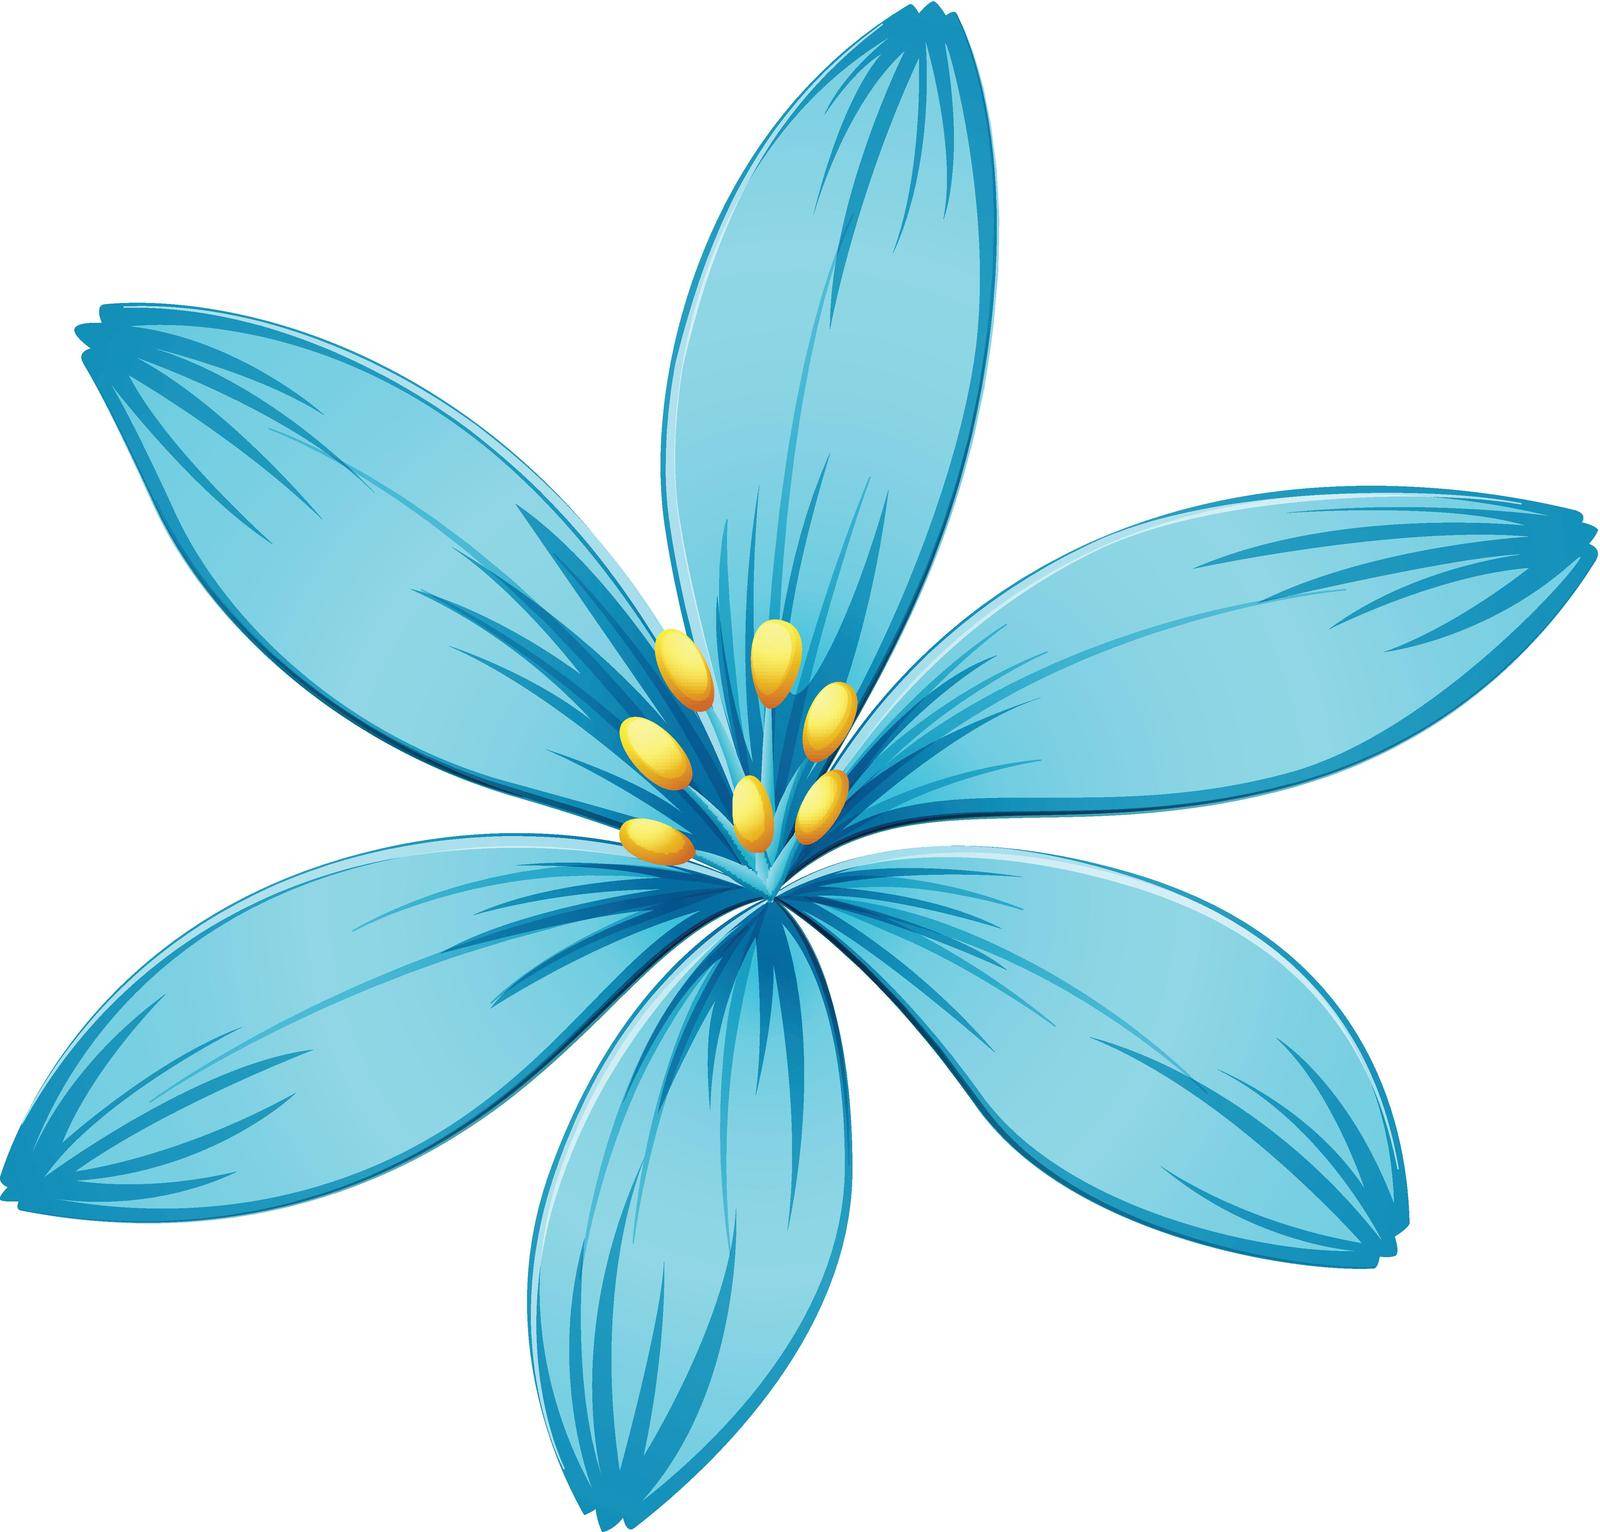 Illustration of a blue flower on a white background